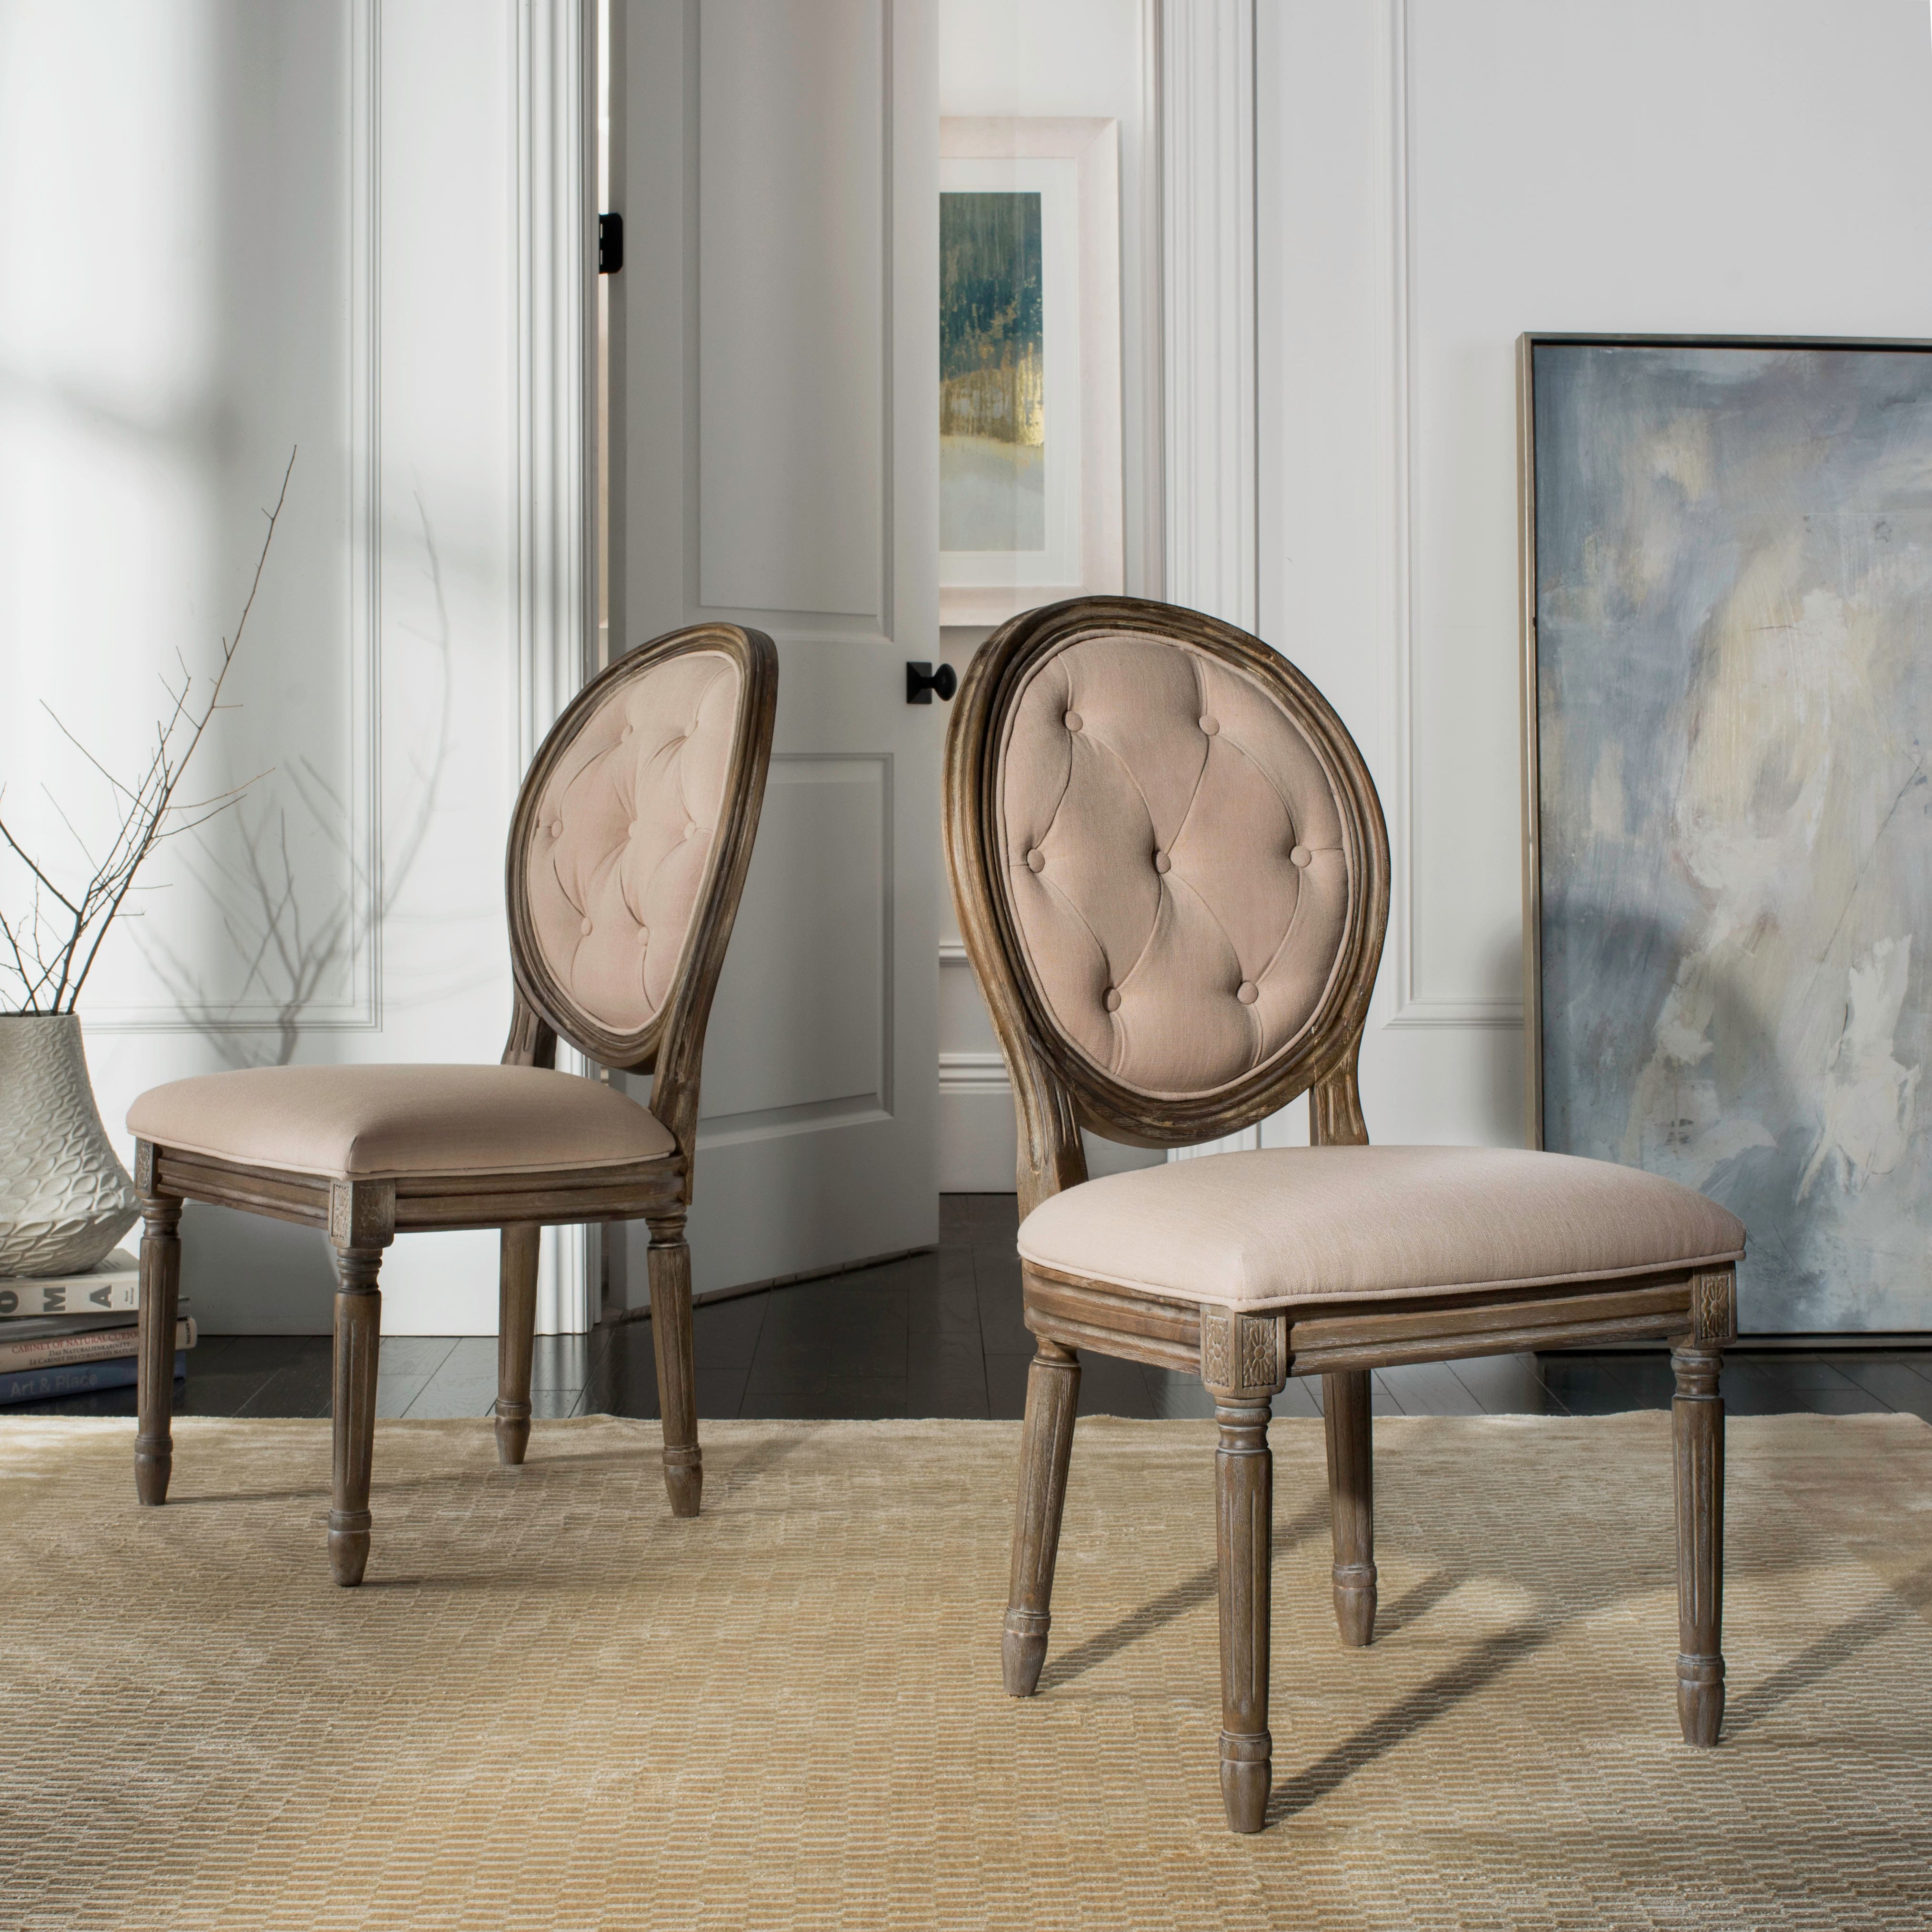 Holloway Tufted Oval Side Chair Set of 2 in Beige